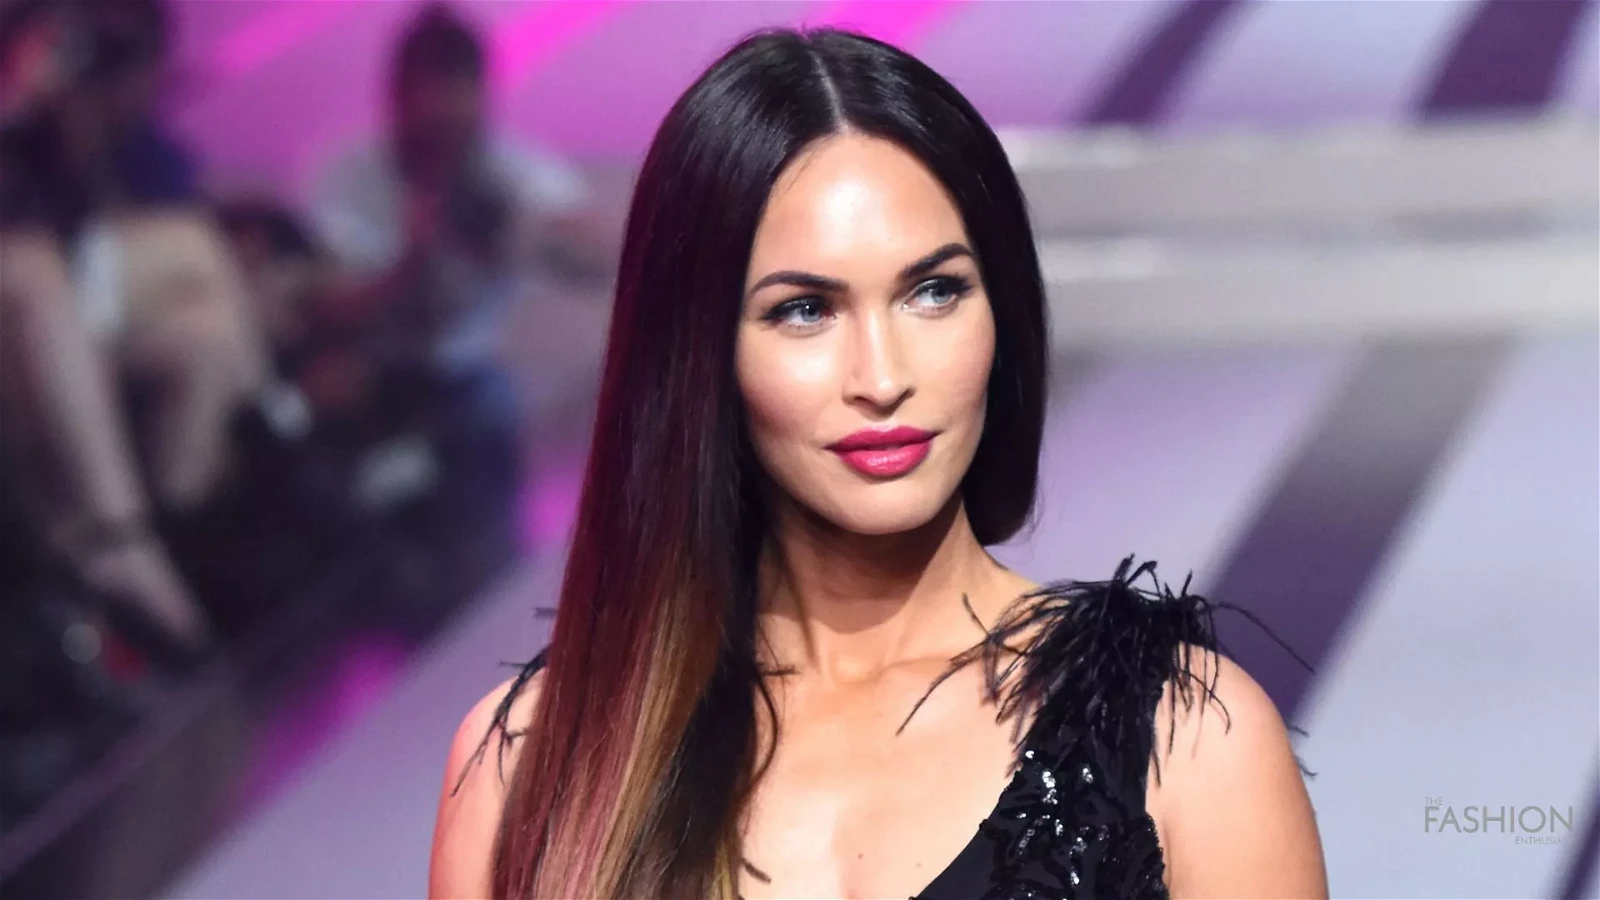 Megan Fox got into much controversy for her comment of Michael Bay